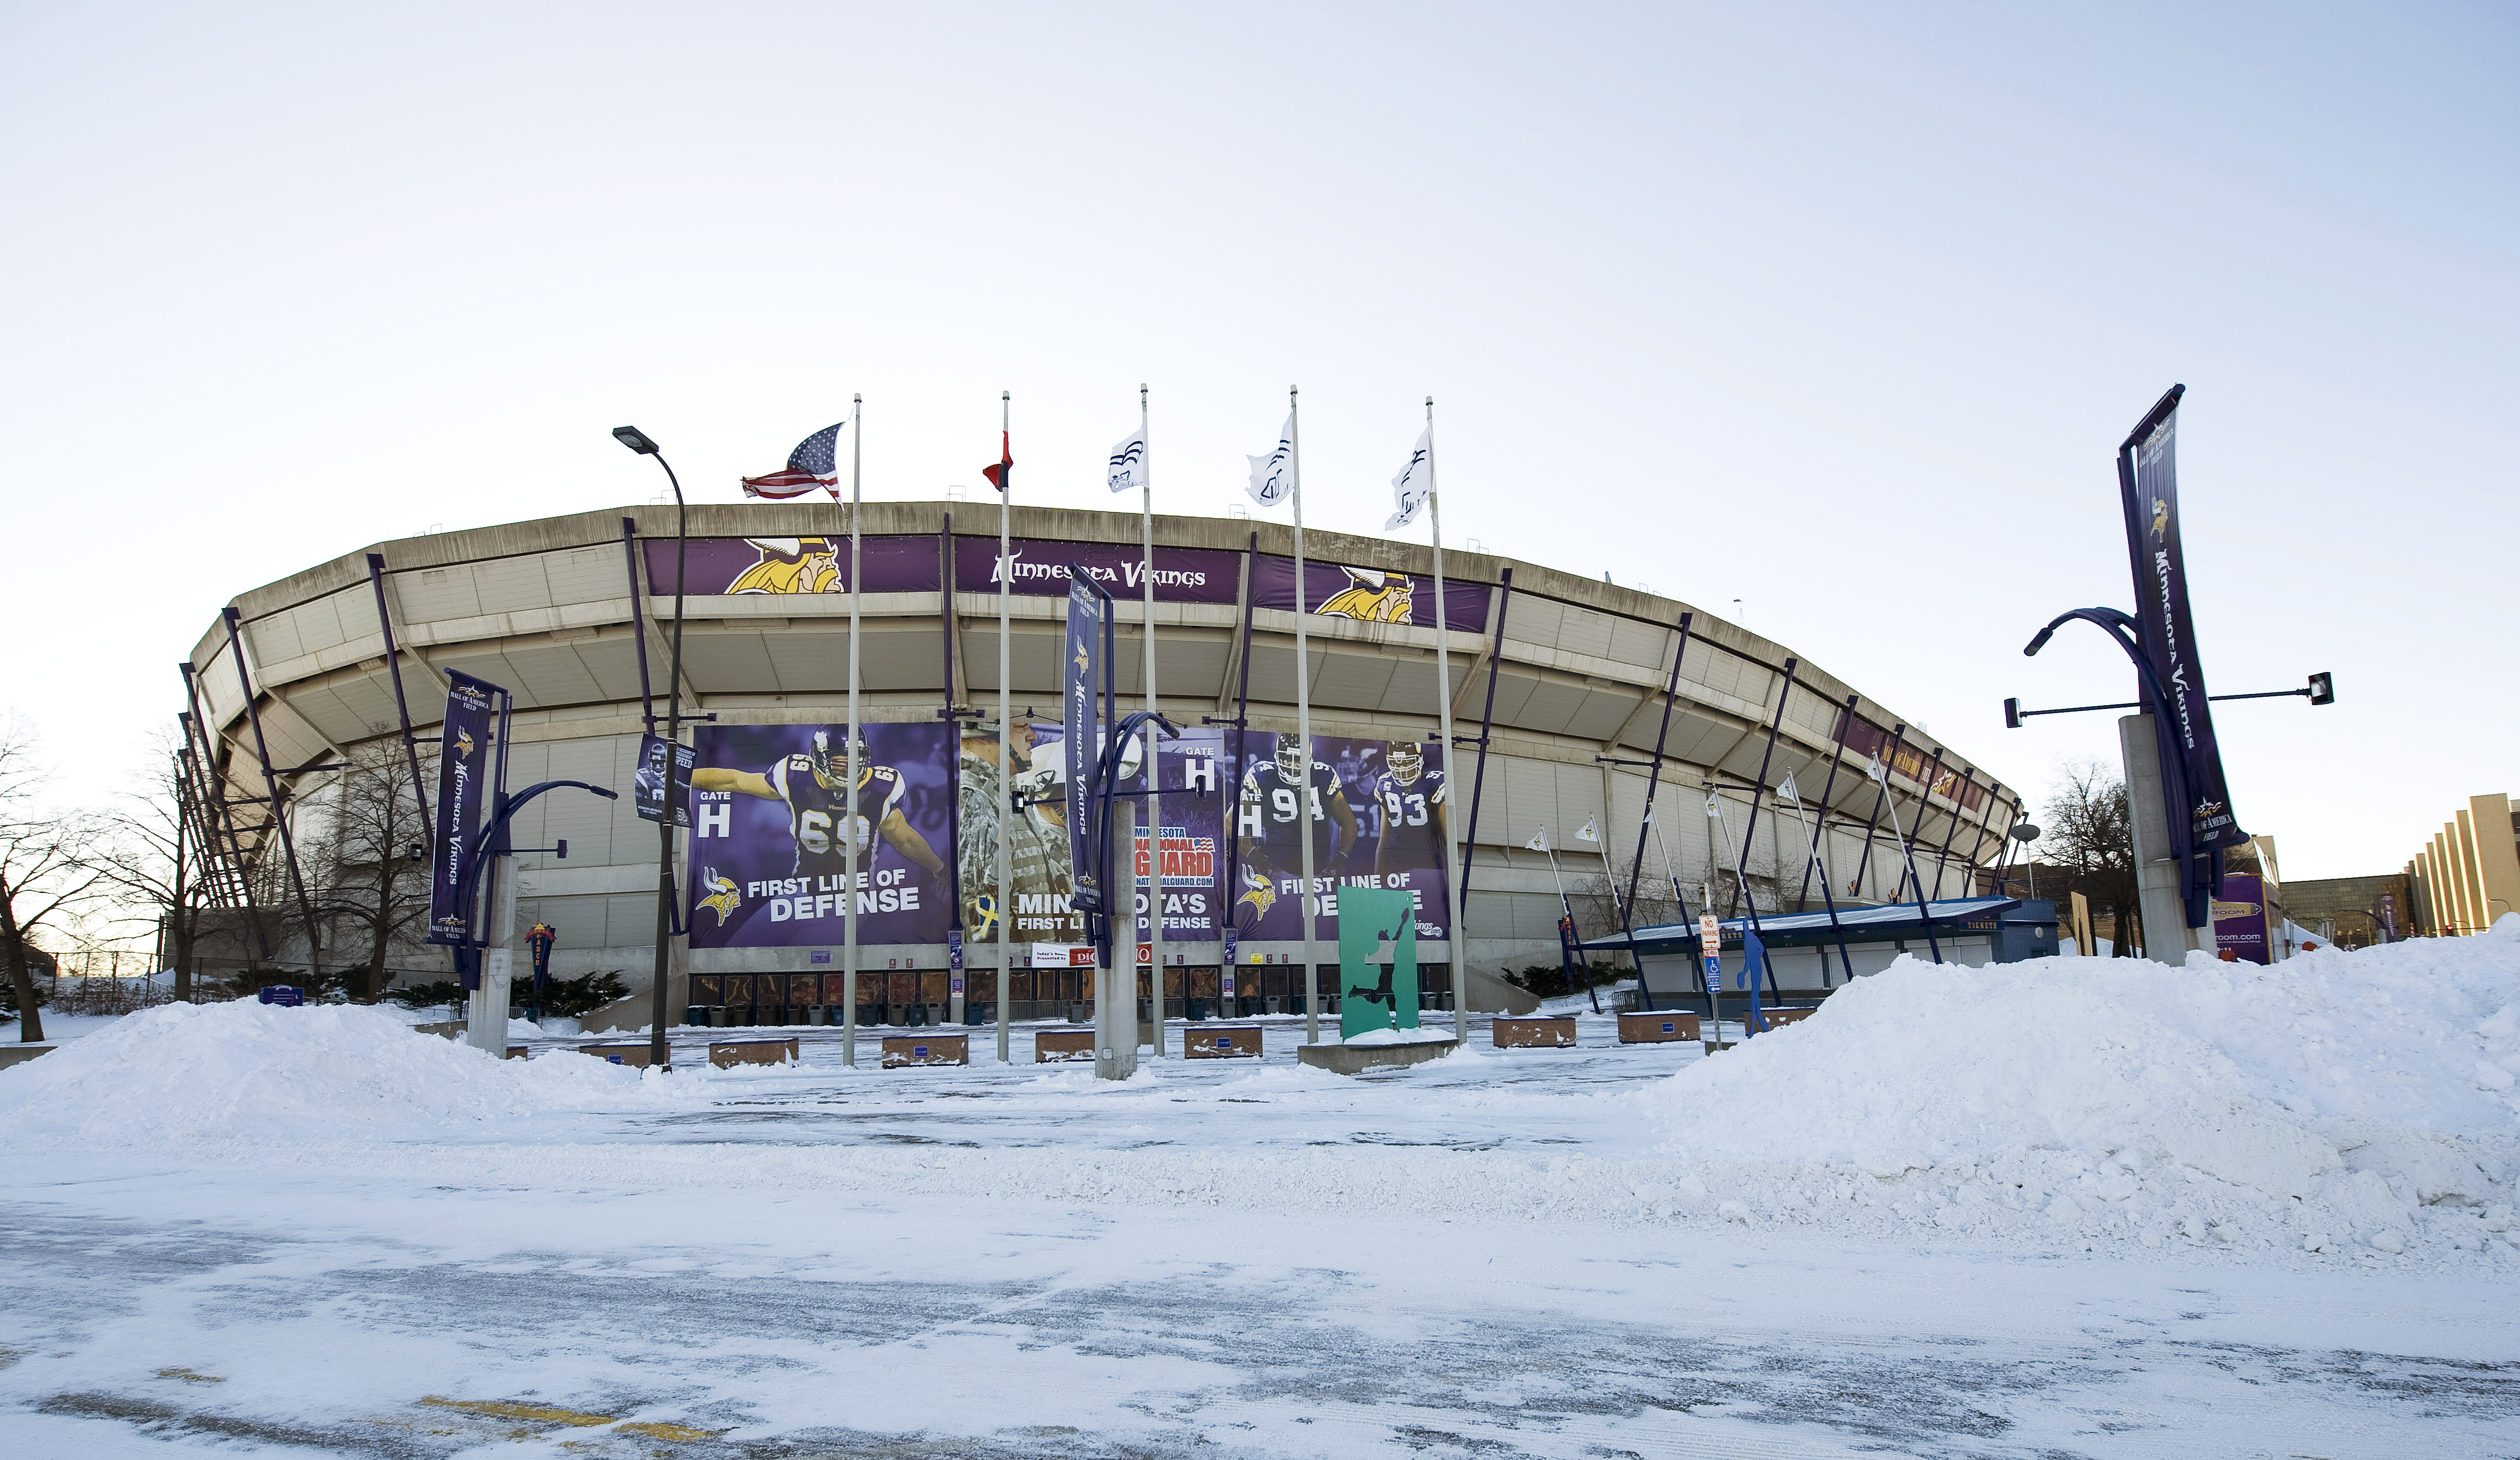 MINNEAPOLIS, MN - DECEMBER 12:  Snow surrounds the Hubert H. Humphrey Metrodome, Mall of America Stadium where the inflatable roof collapsed under the weight of snow during a storm Sunday morning December 12, 2010 in Minneapolis, Minnesota. A blizzard dum